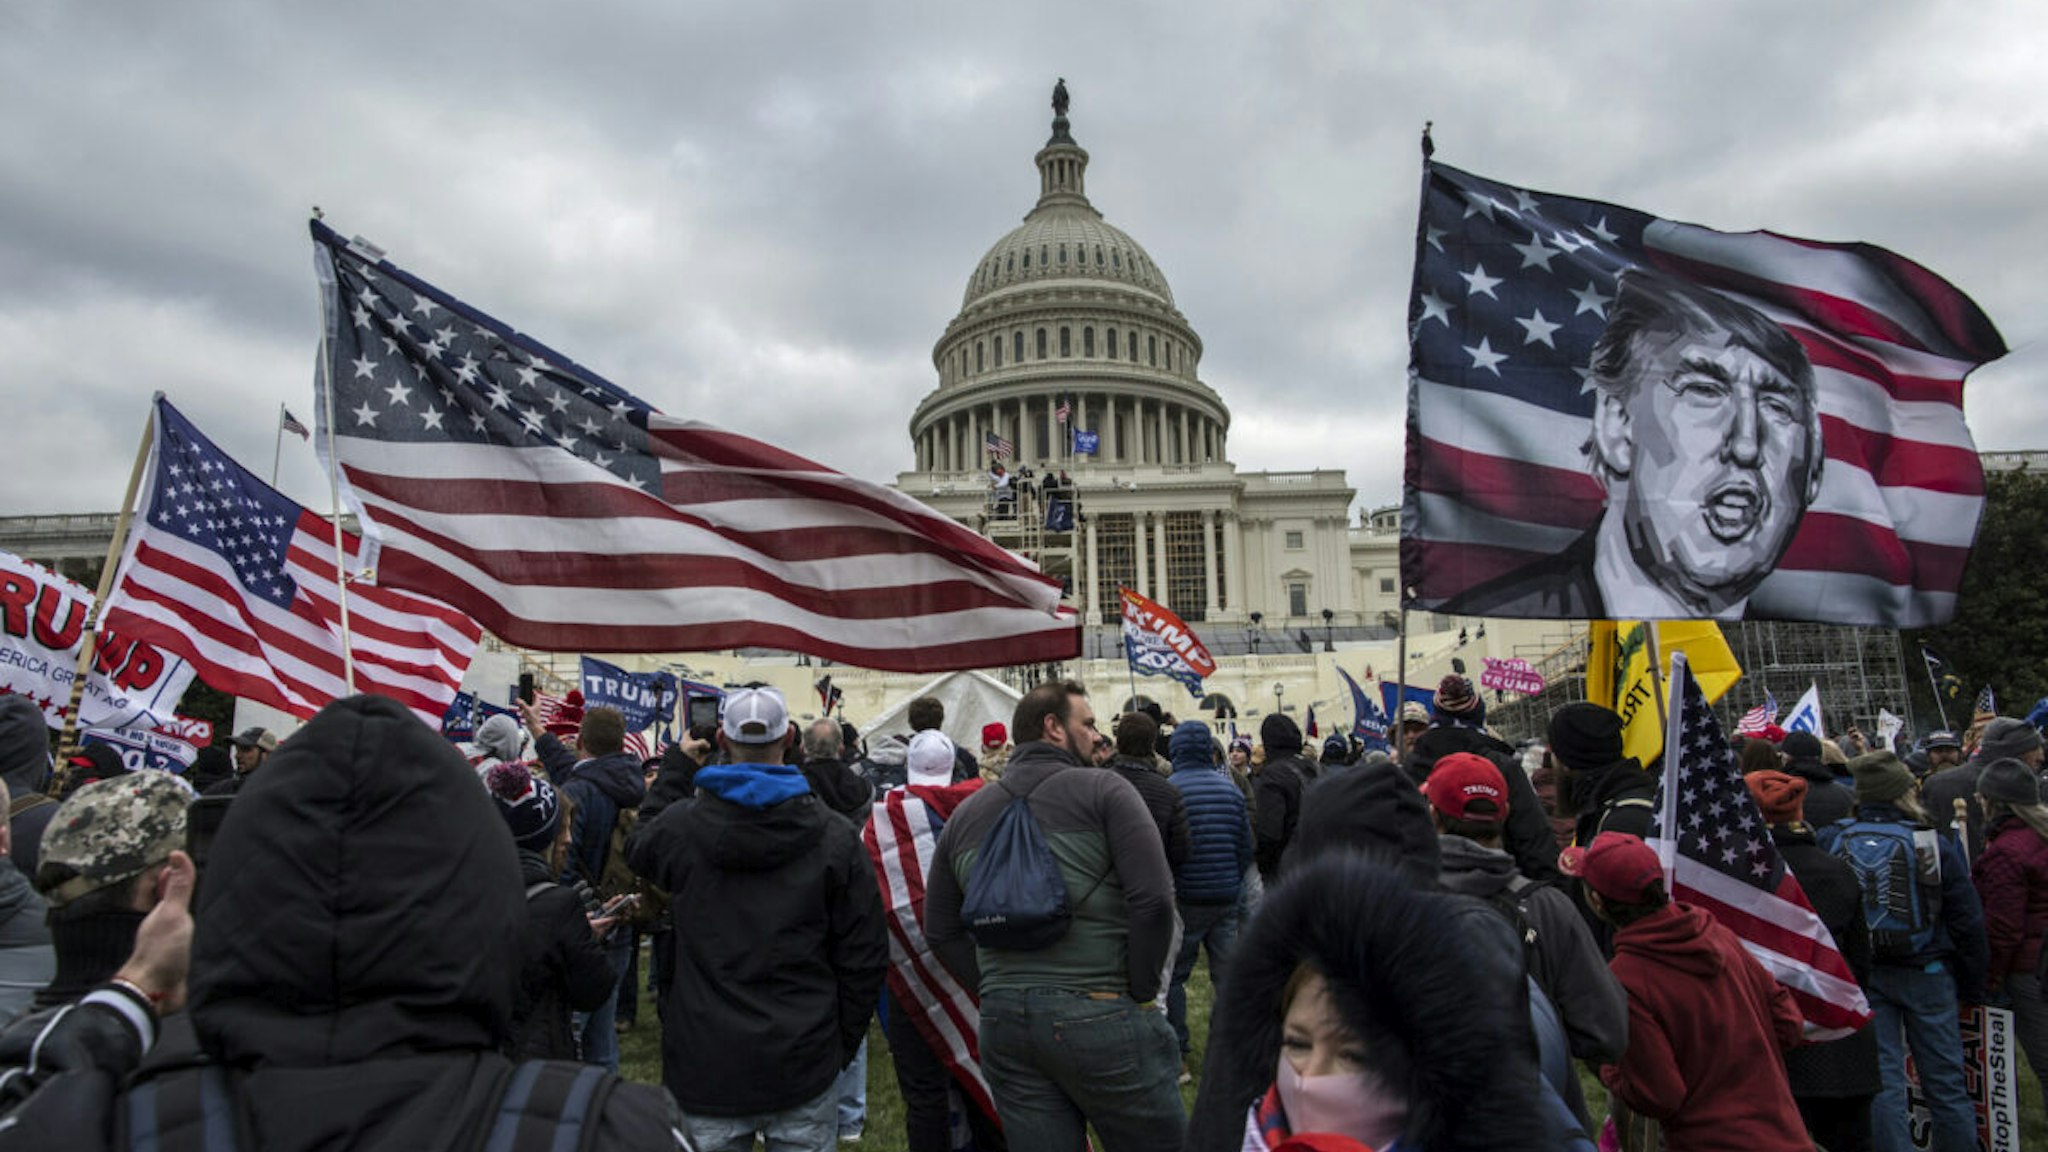 US President Donald Trump's supporters gather outside the Capitol building. Pro-Trump rioters stormed the US Capitol as lawmakers were set to sign off Wednesday on President-elect Joe Biden's electoral victory in what was supposed to be a routine process headed to Inauguration Day.